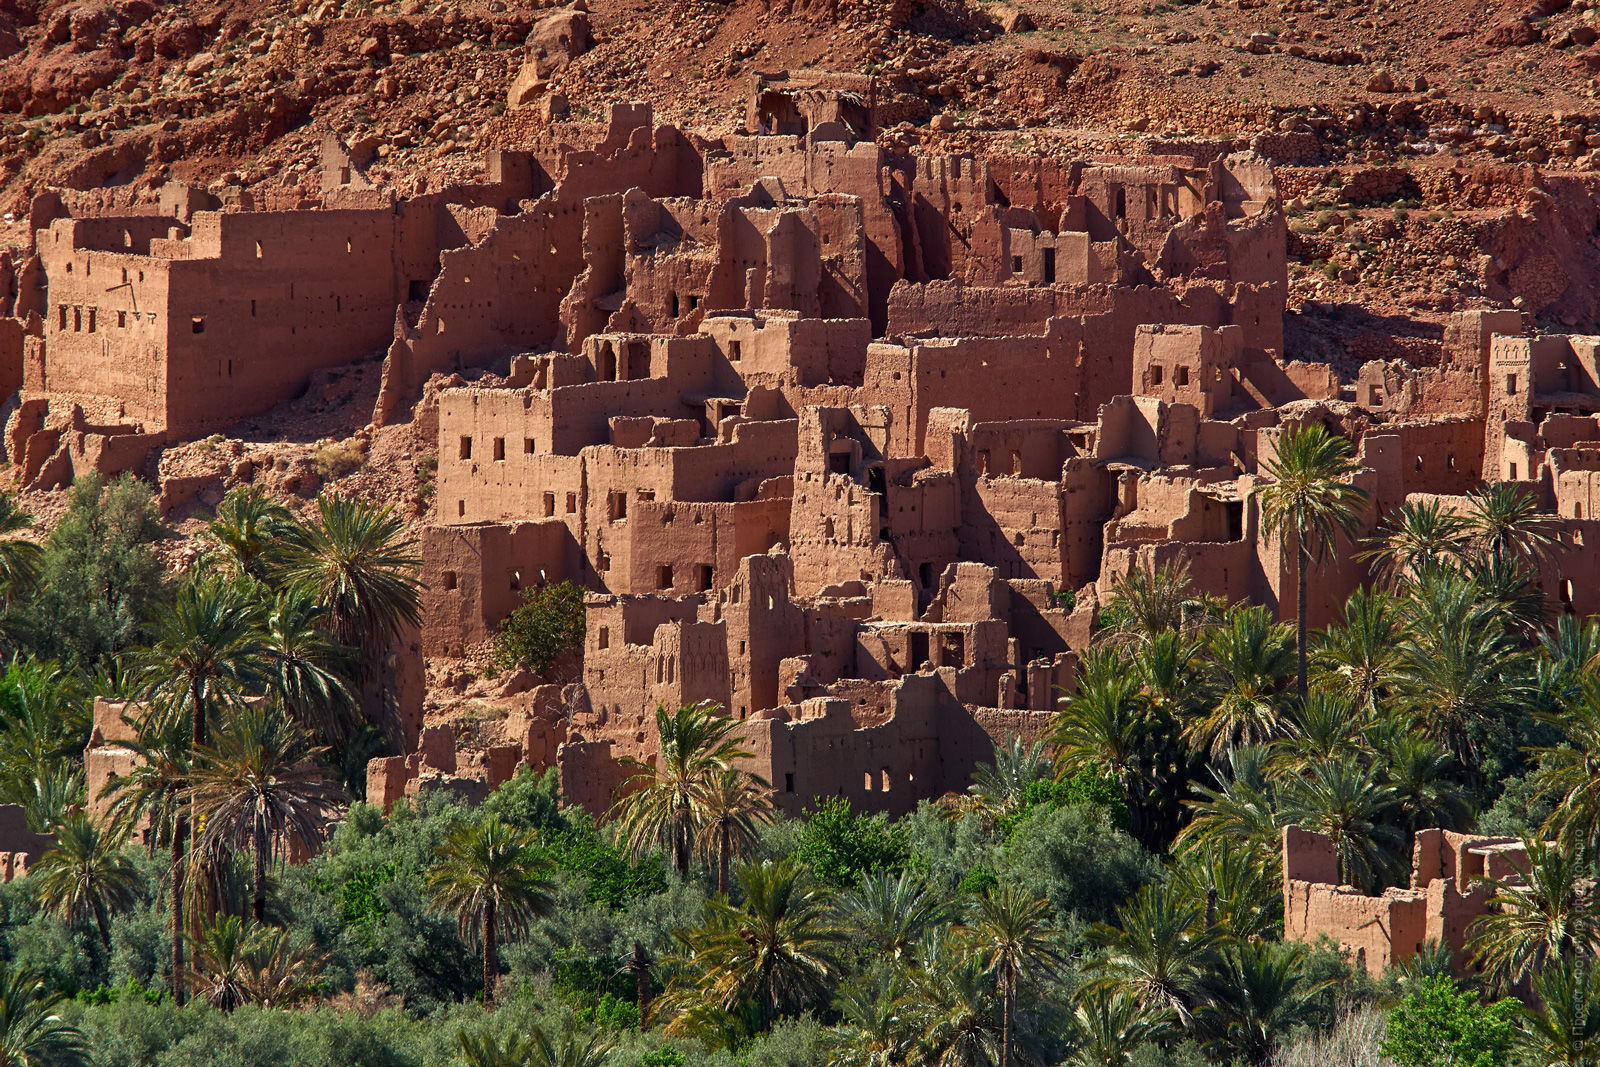 Old buildings of Tinghir, Morocco. Adventure photo tour: medina, cascades, sands and ports of Morocco, April 4 - 17, 2020.